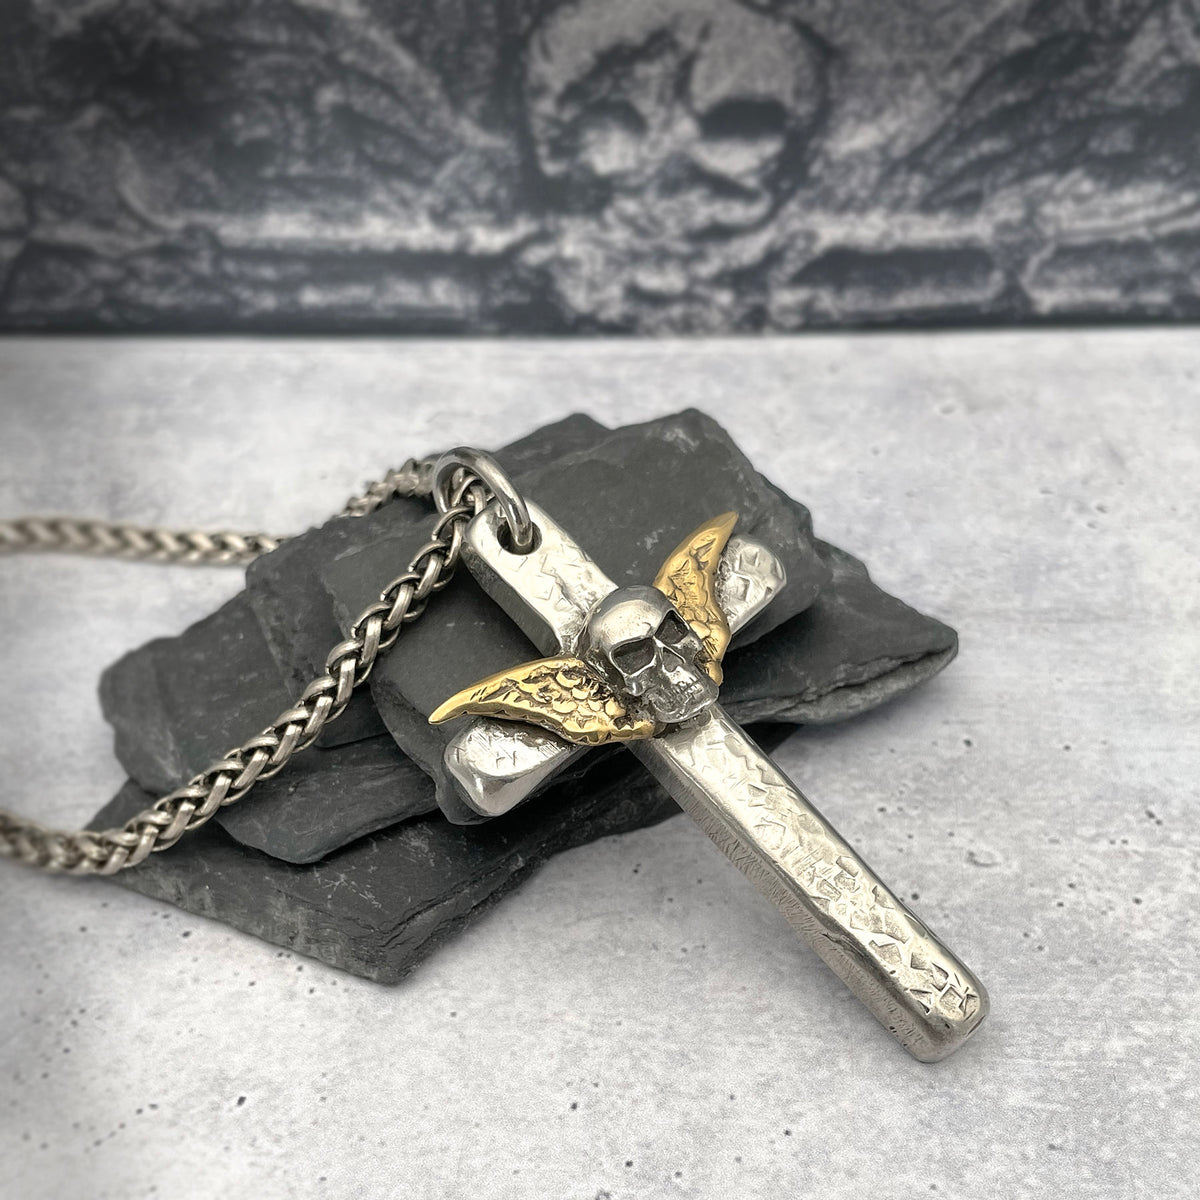 Cross Neck Knife With Hidden Blade and Necklace